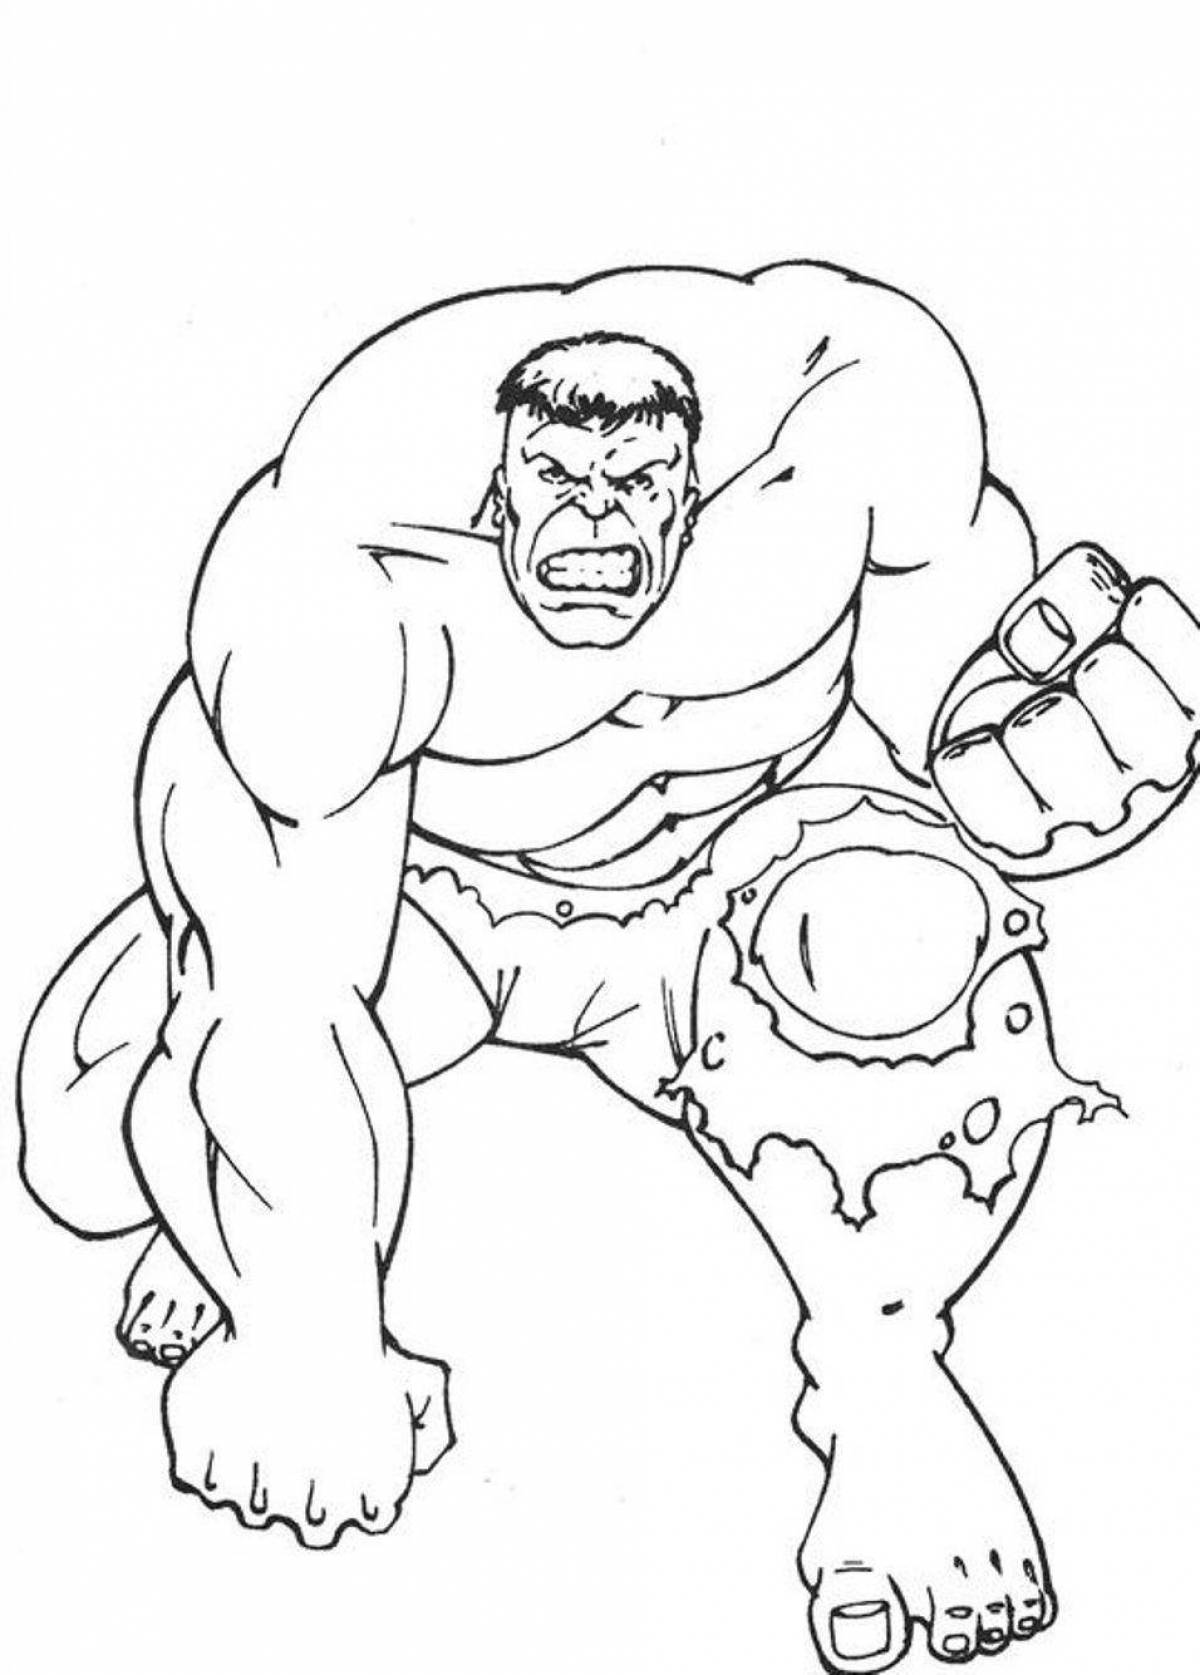 Attractive hulk coloring book for kids